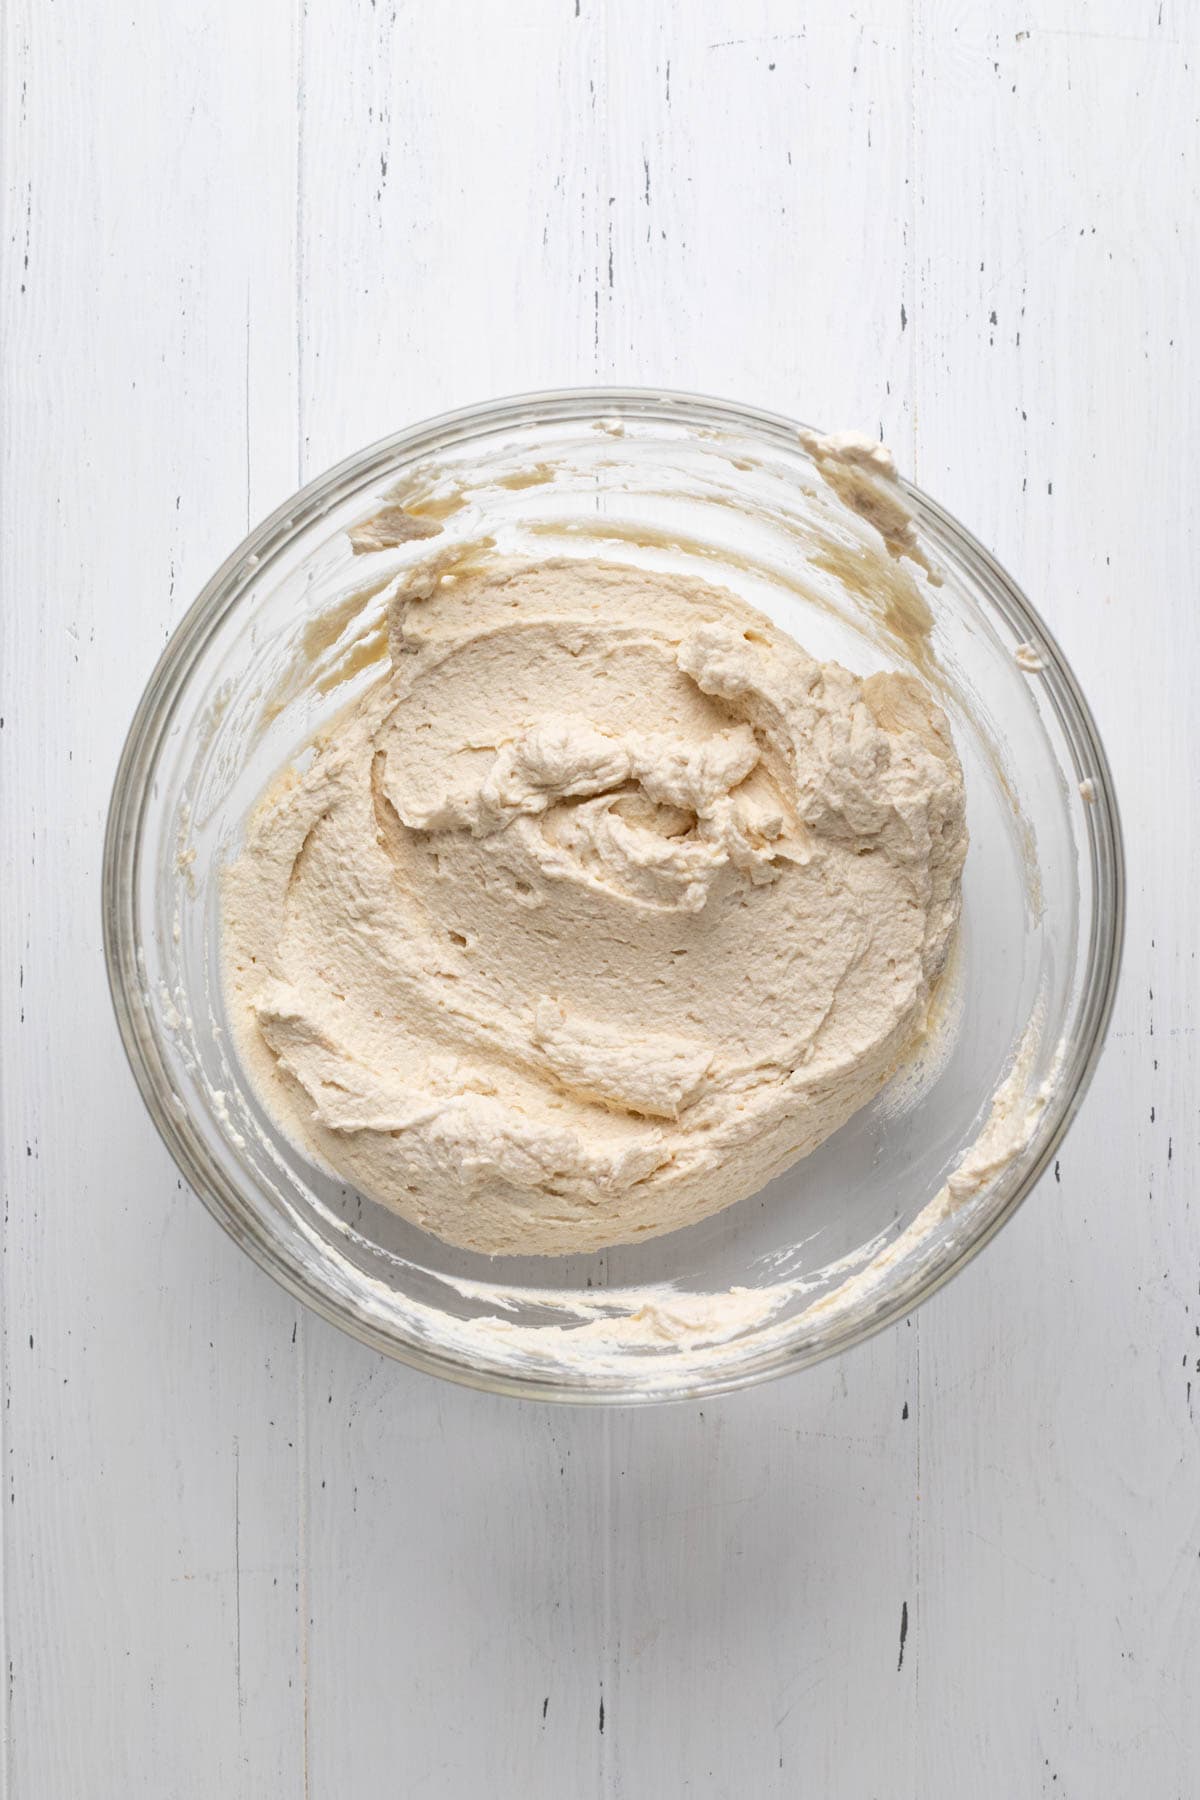 Whipped cream combined with Biscoff spread and mascarpone cheese in a glass mixing bowl.